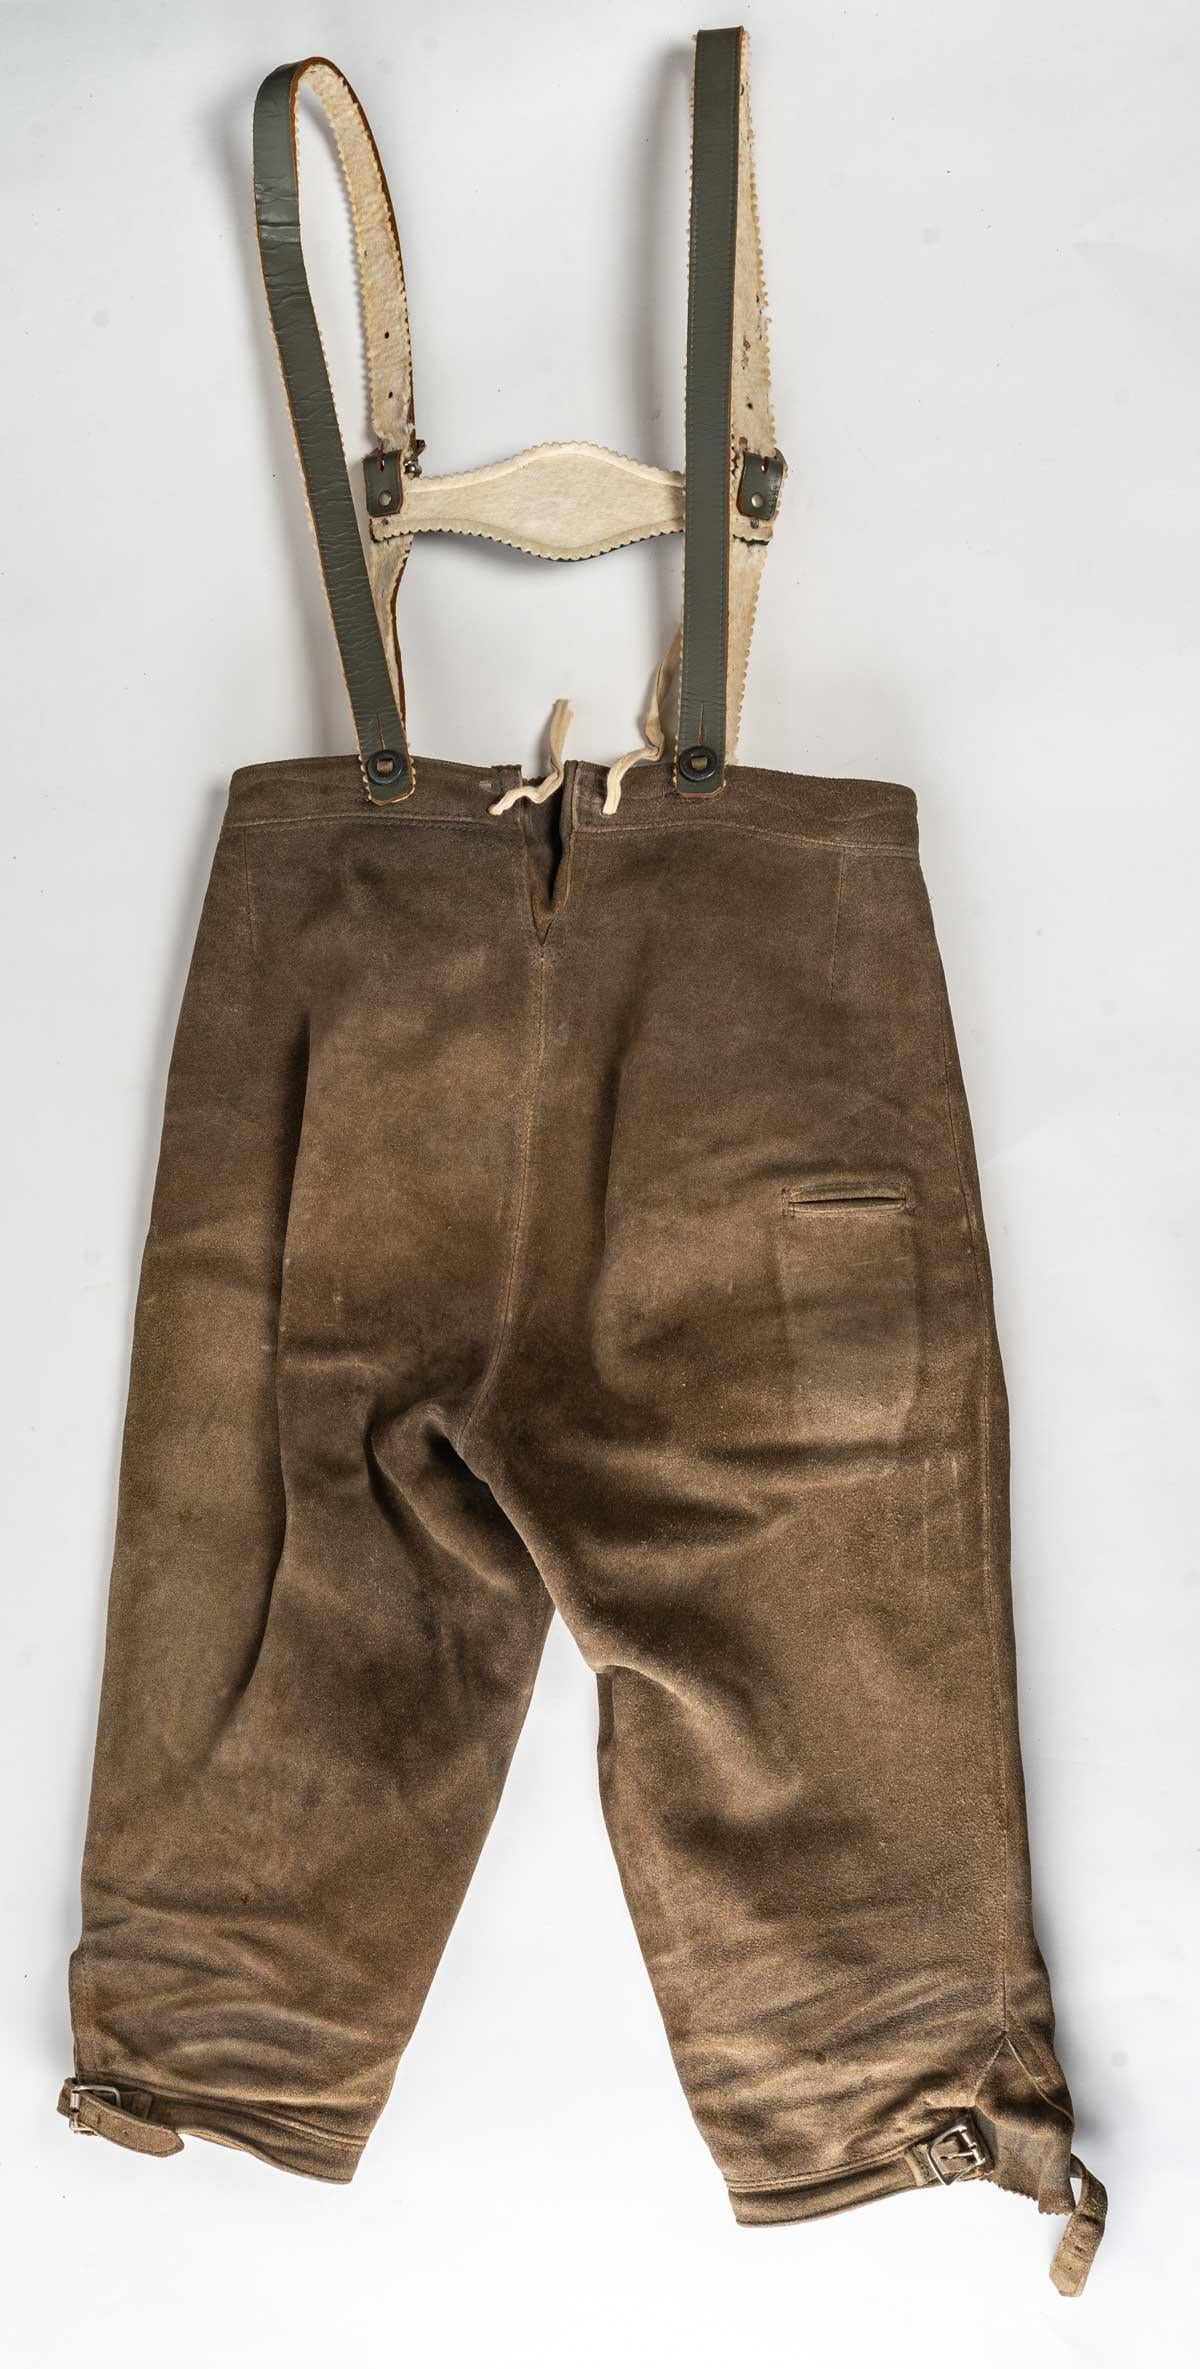 Short trousers with braces from Tyrol, early 20th century. 
Measures: H: 70 cm, W: 60 cm, D: 2 cm.